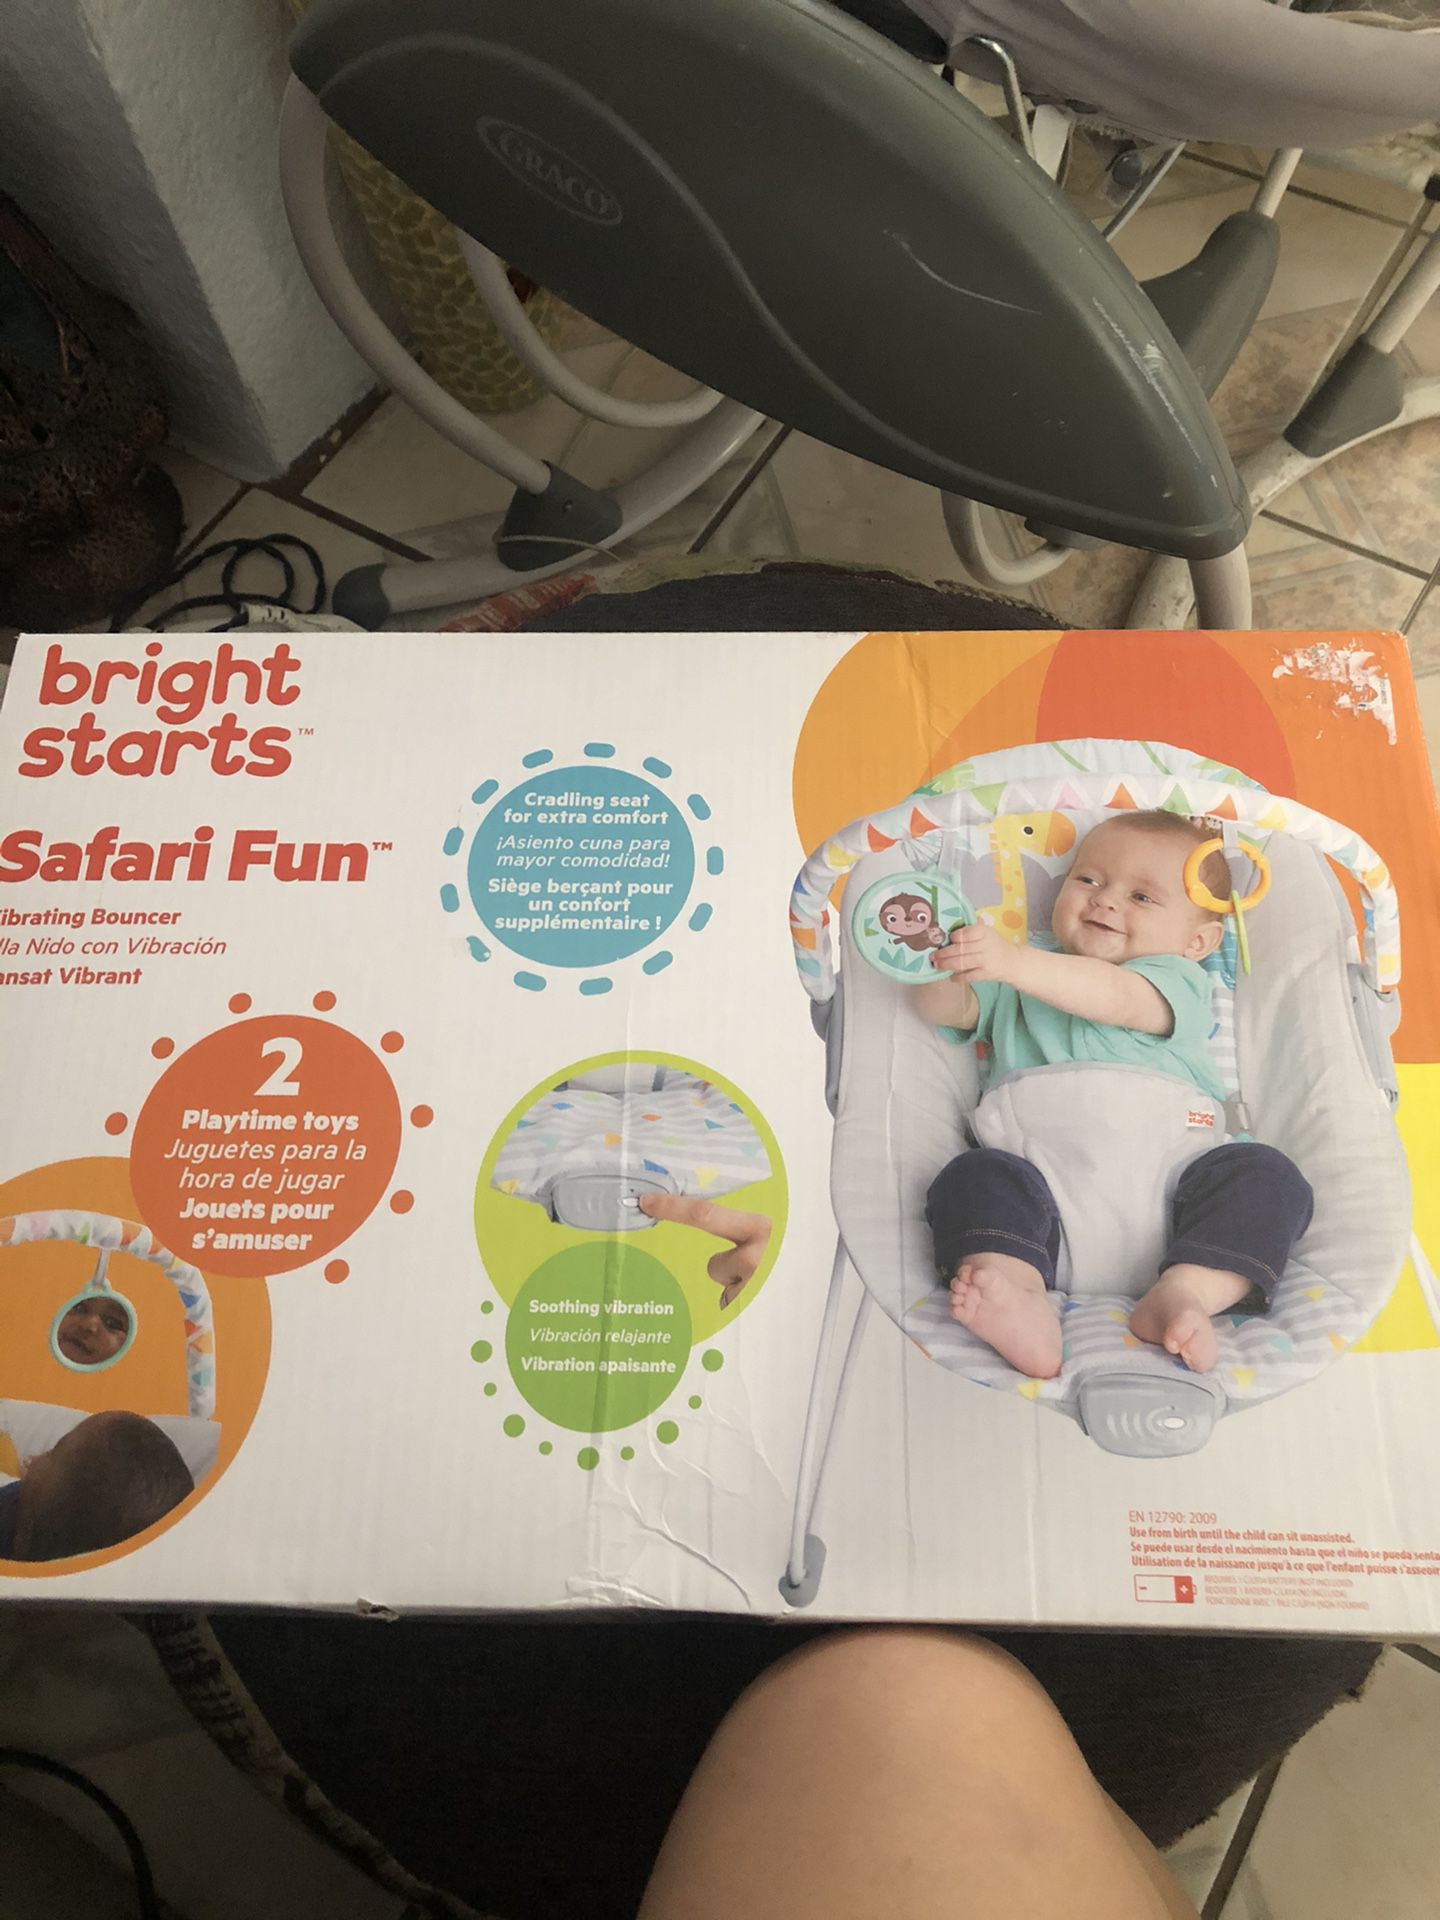 Vibrating bouncer for baby’s